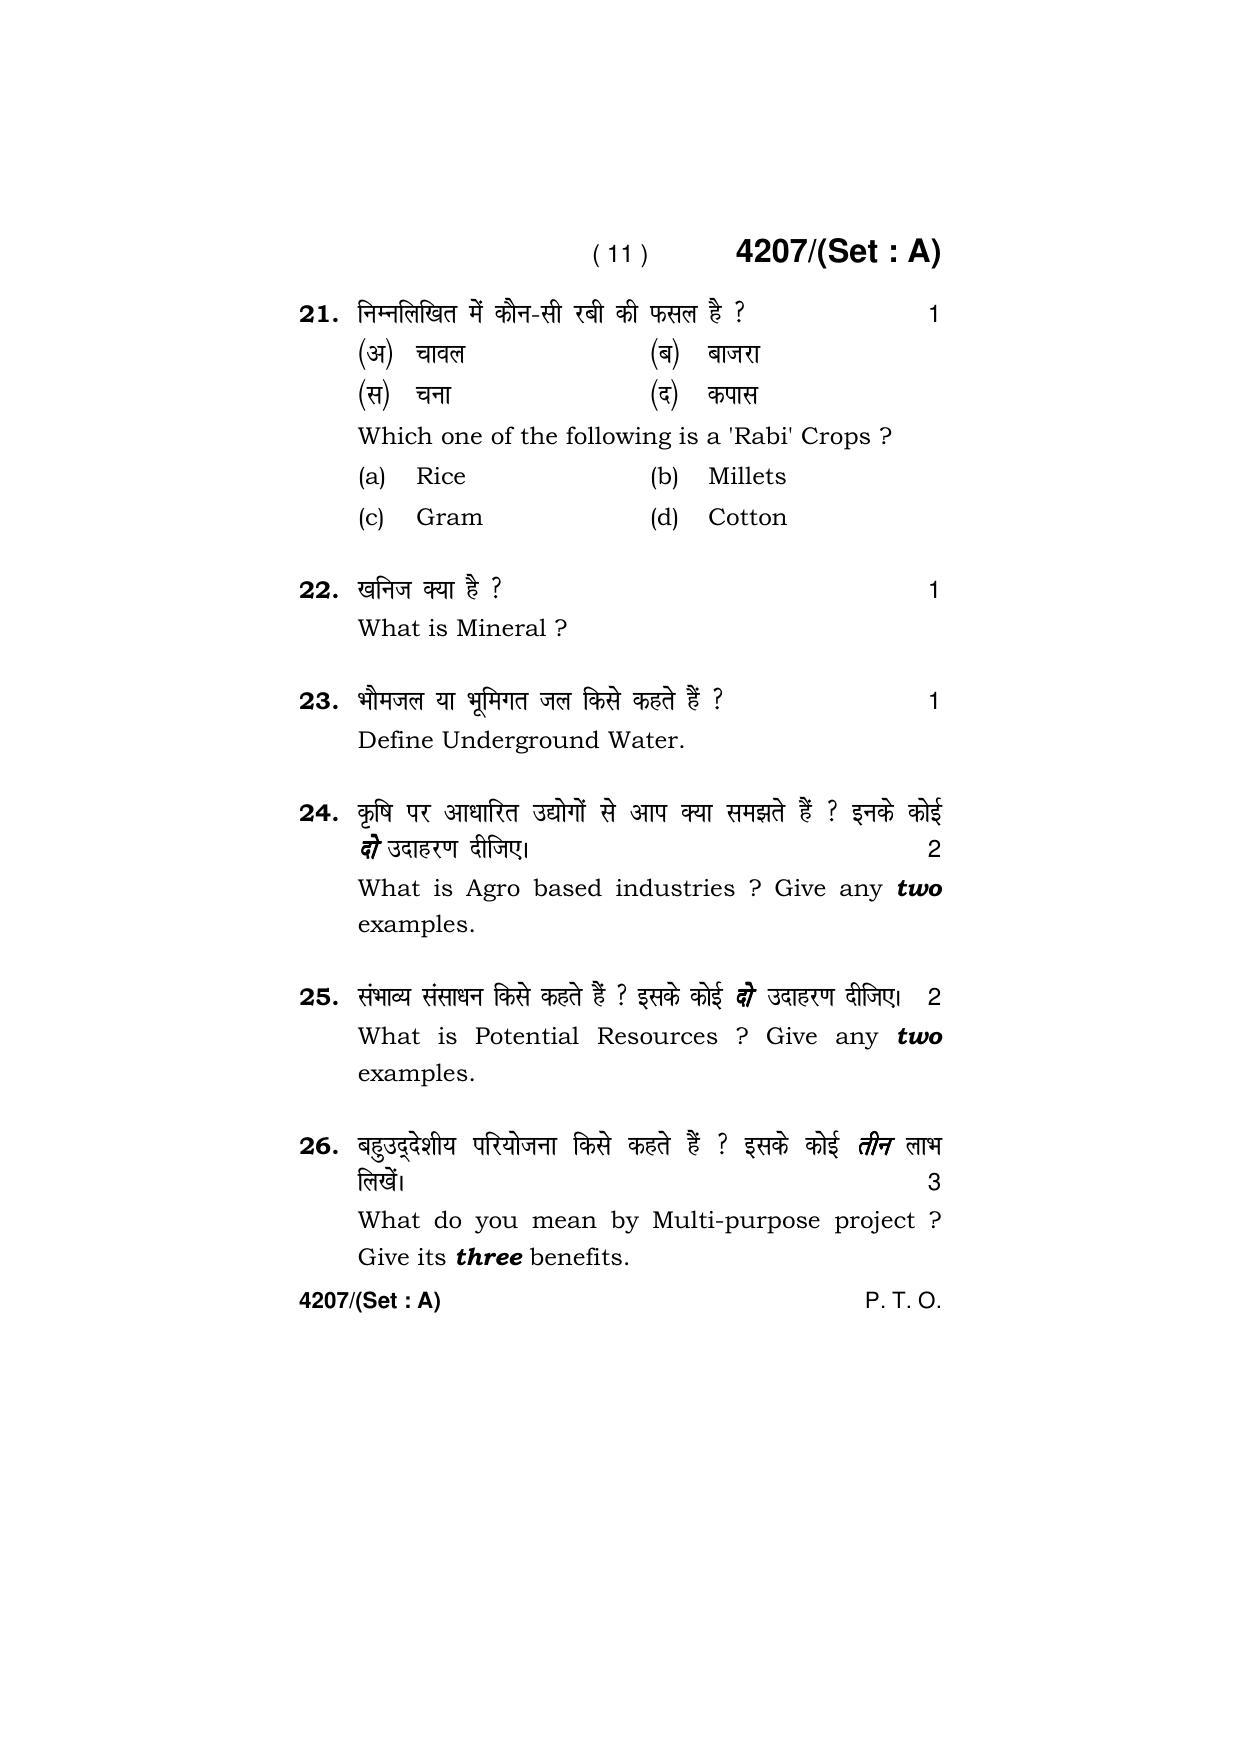 Haryana Board HBSE Class 10 Social Science (All Set) 2019 Question Paper - Page 11